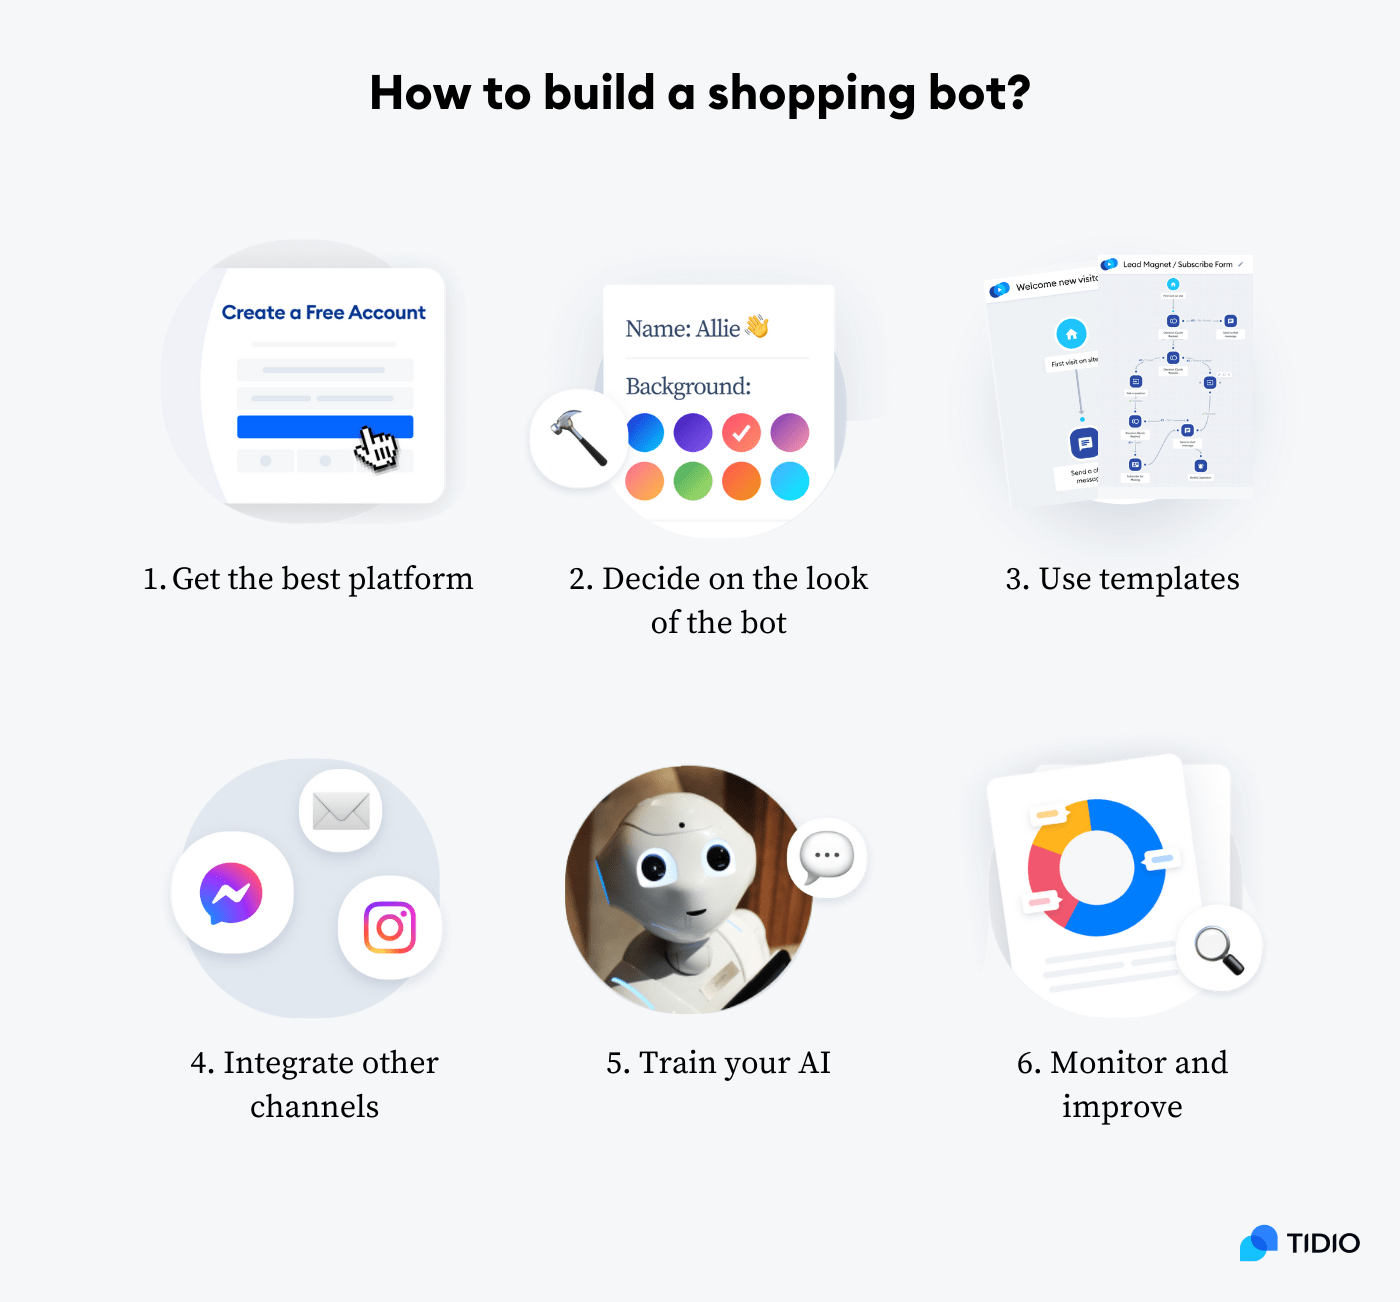 How to create a shopping bot image